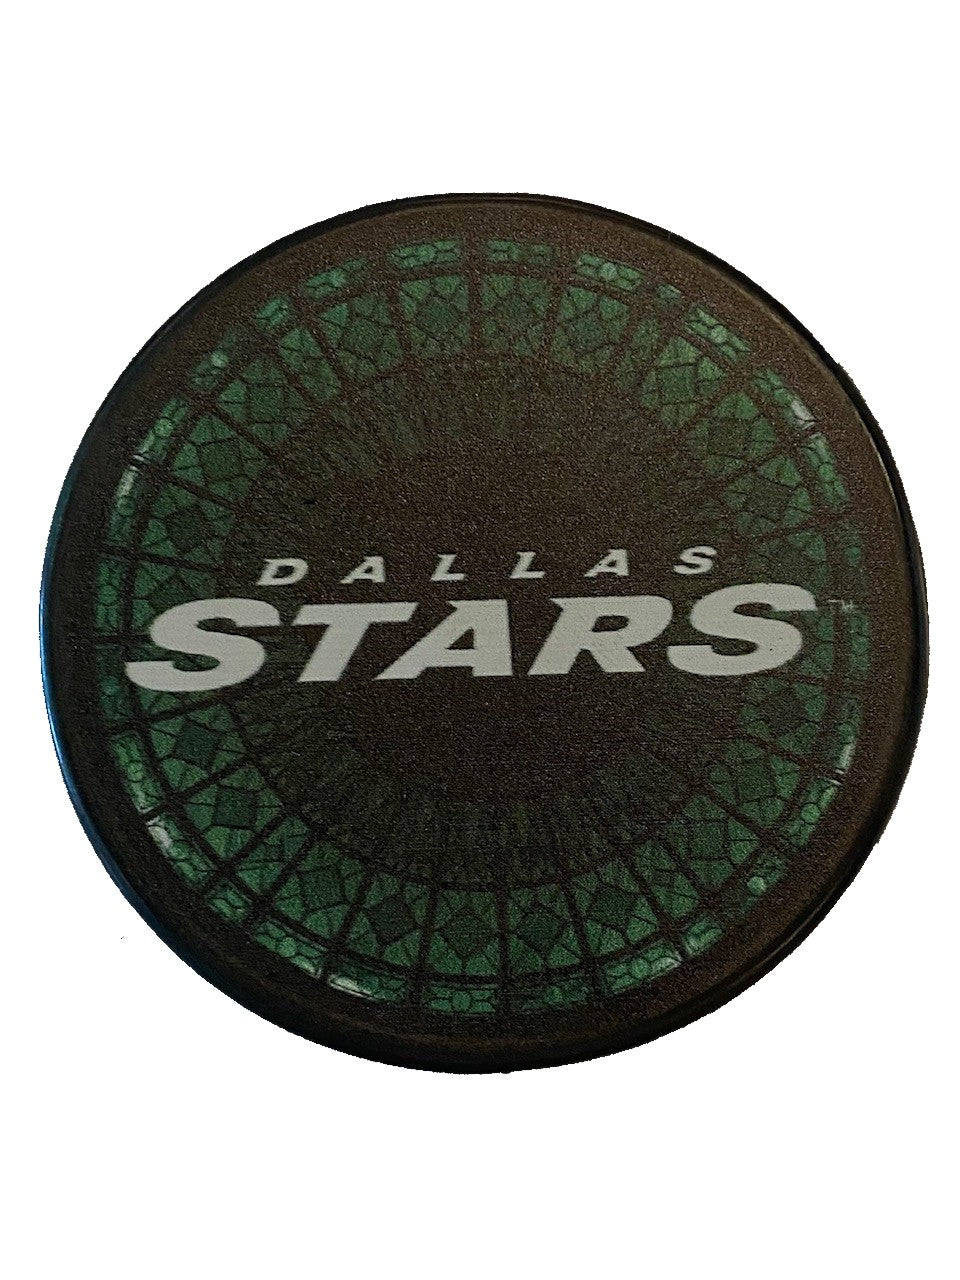 Dallas Stars Stained Glass Design Puck - Top View